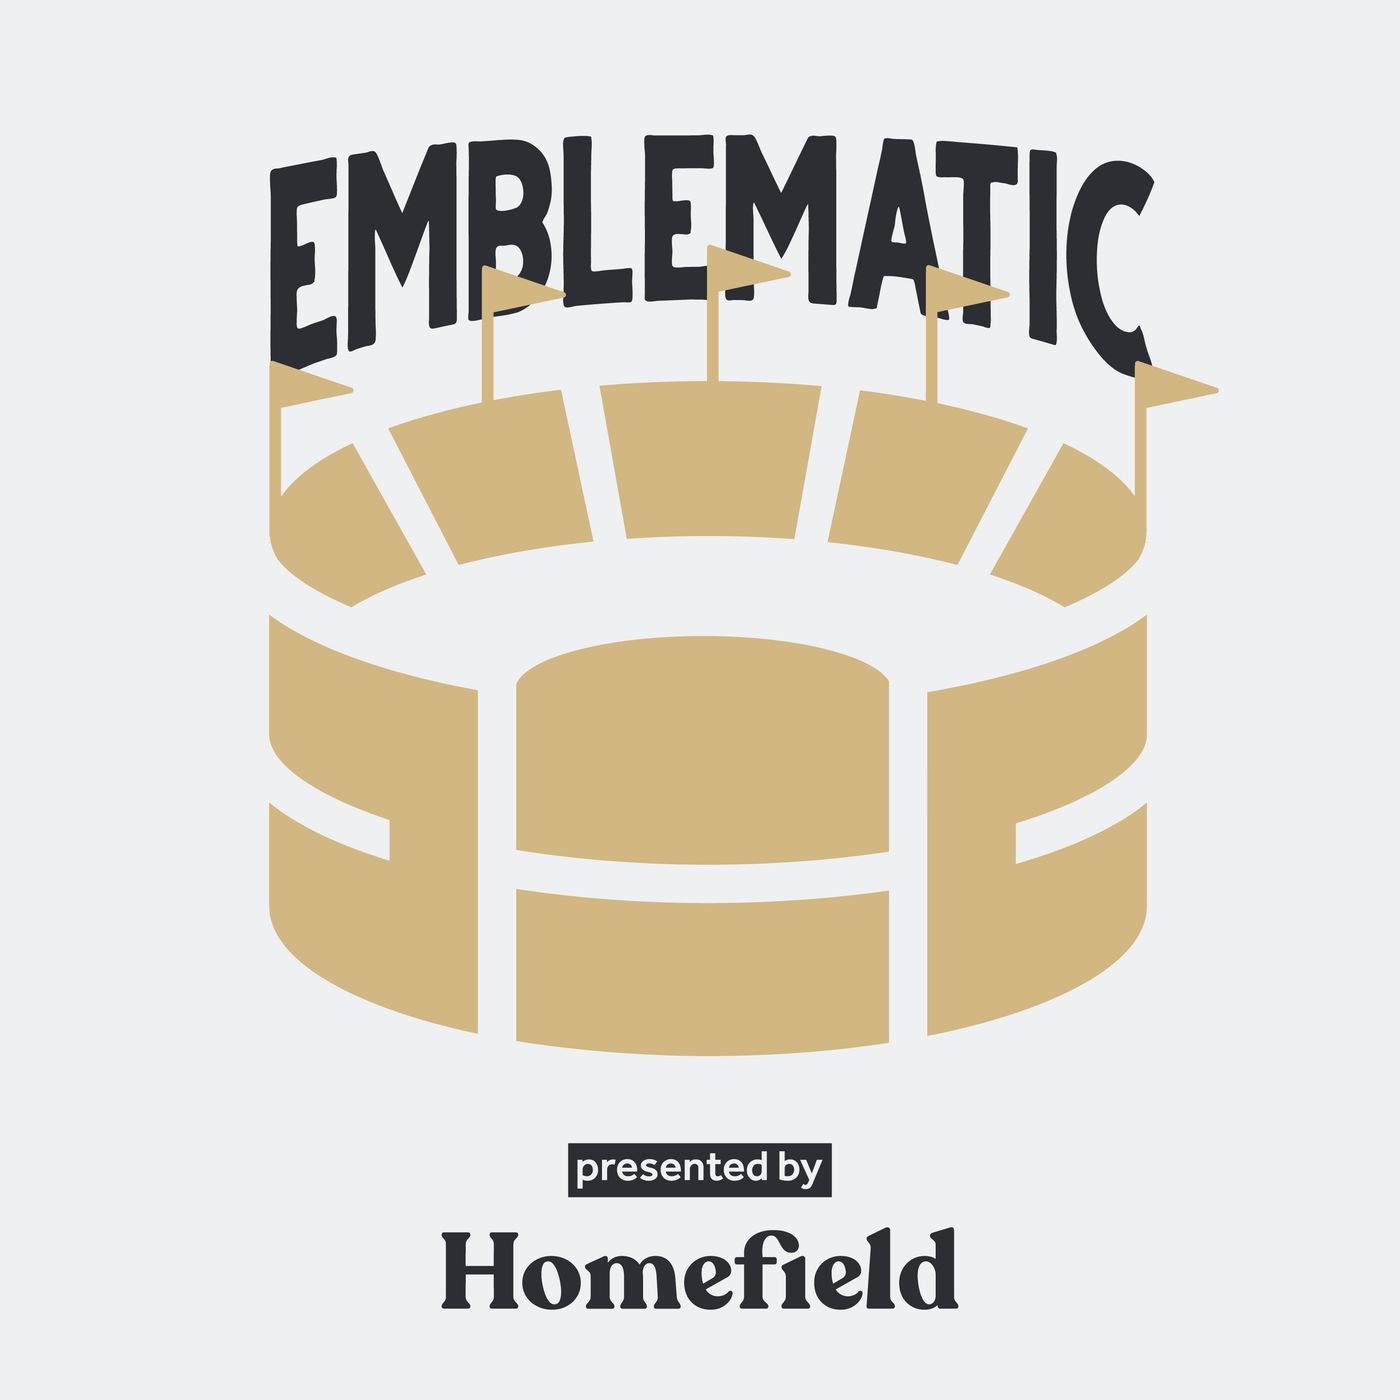 Emblematic by Homefield